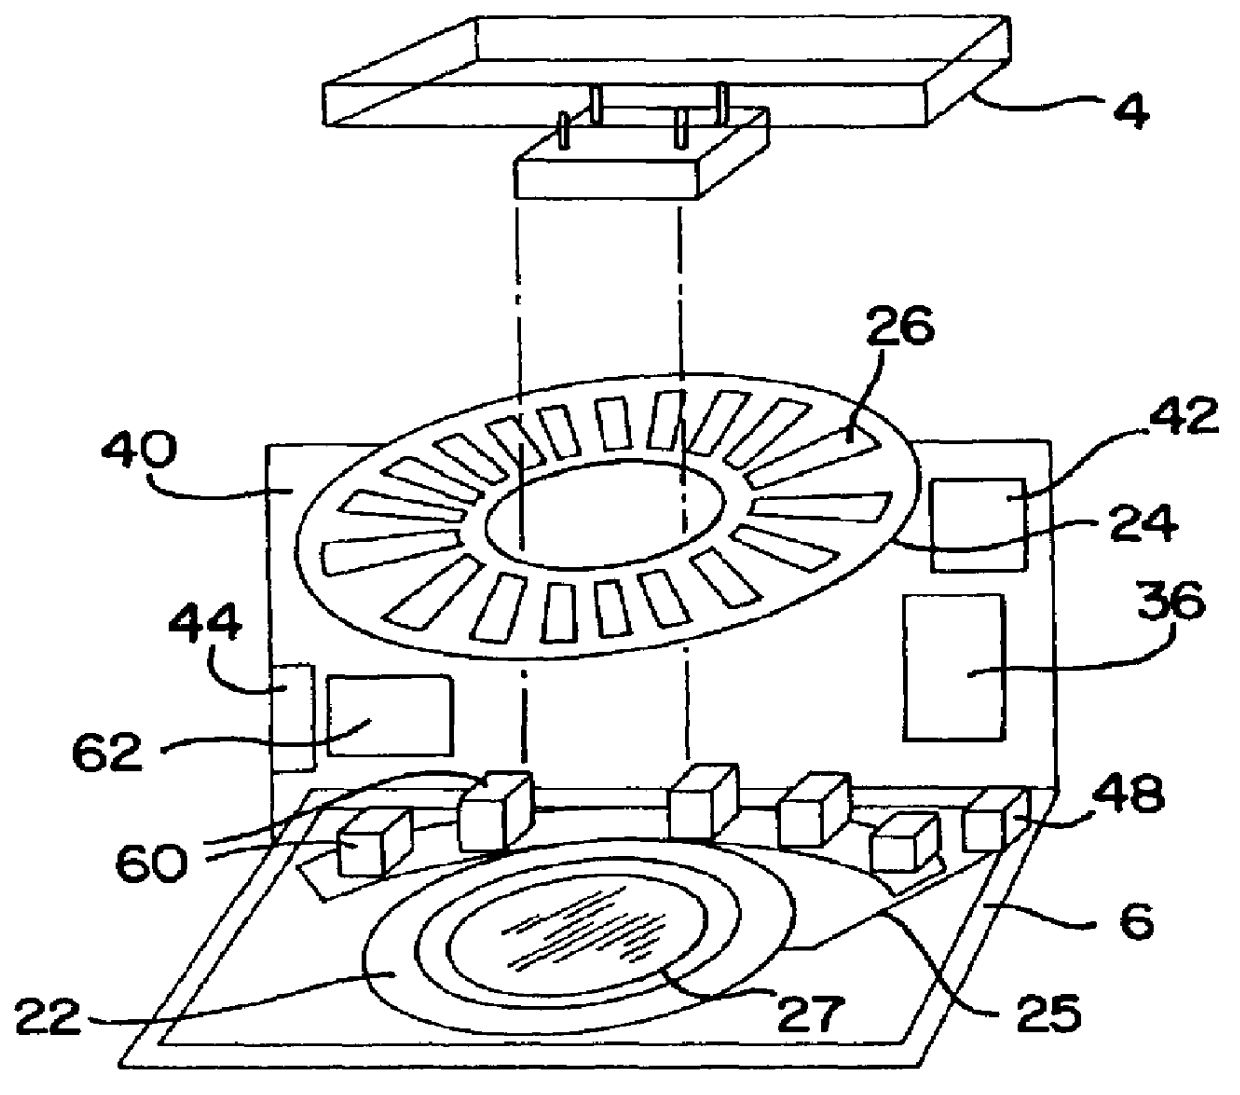 Method and apparatus for rinsing a microscope slide